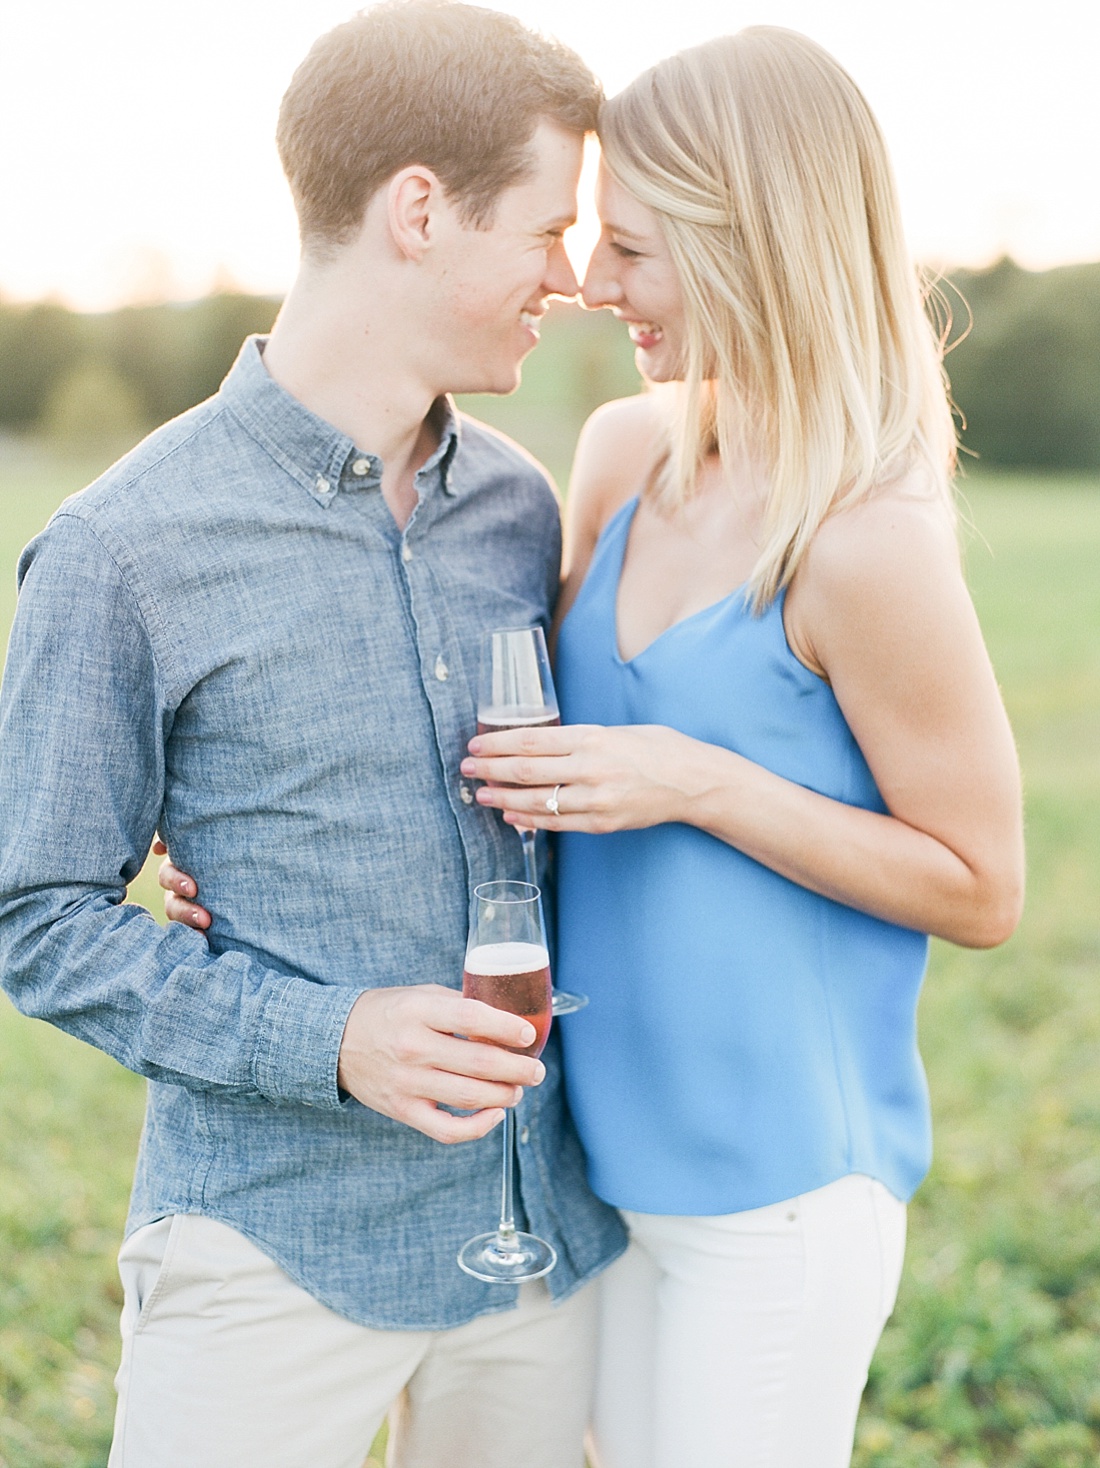 Middleburg, Virginia engagement session |photograph by Abby Grace